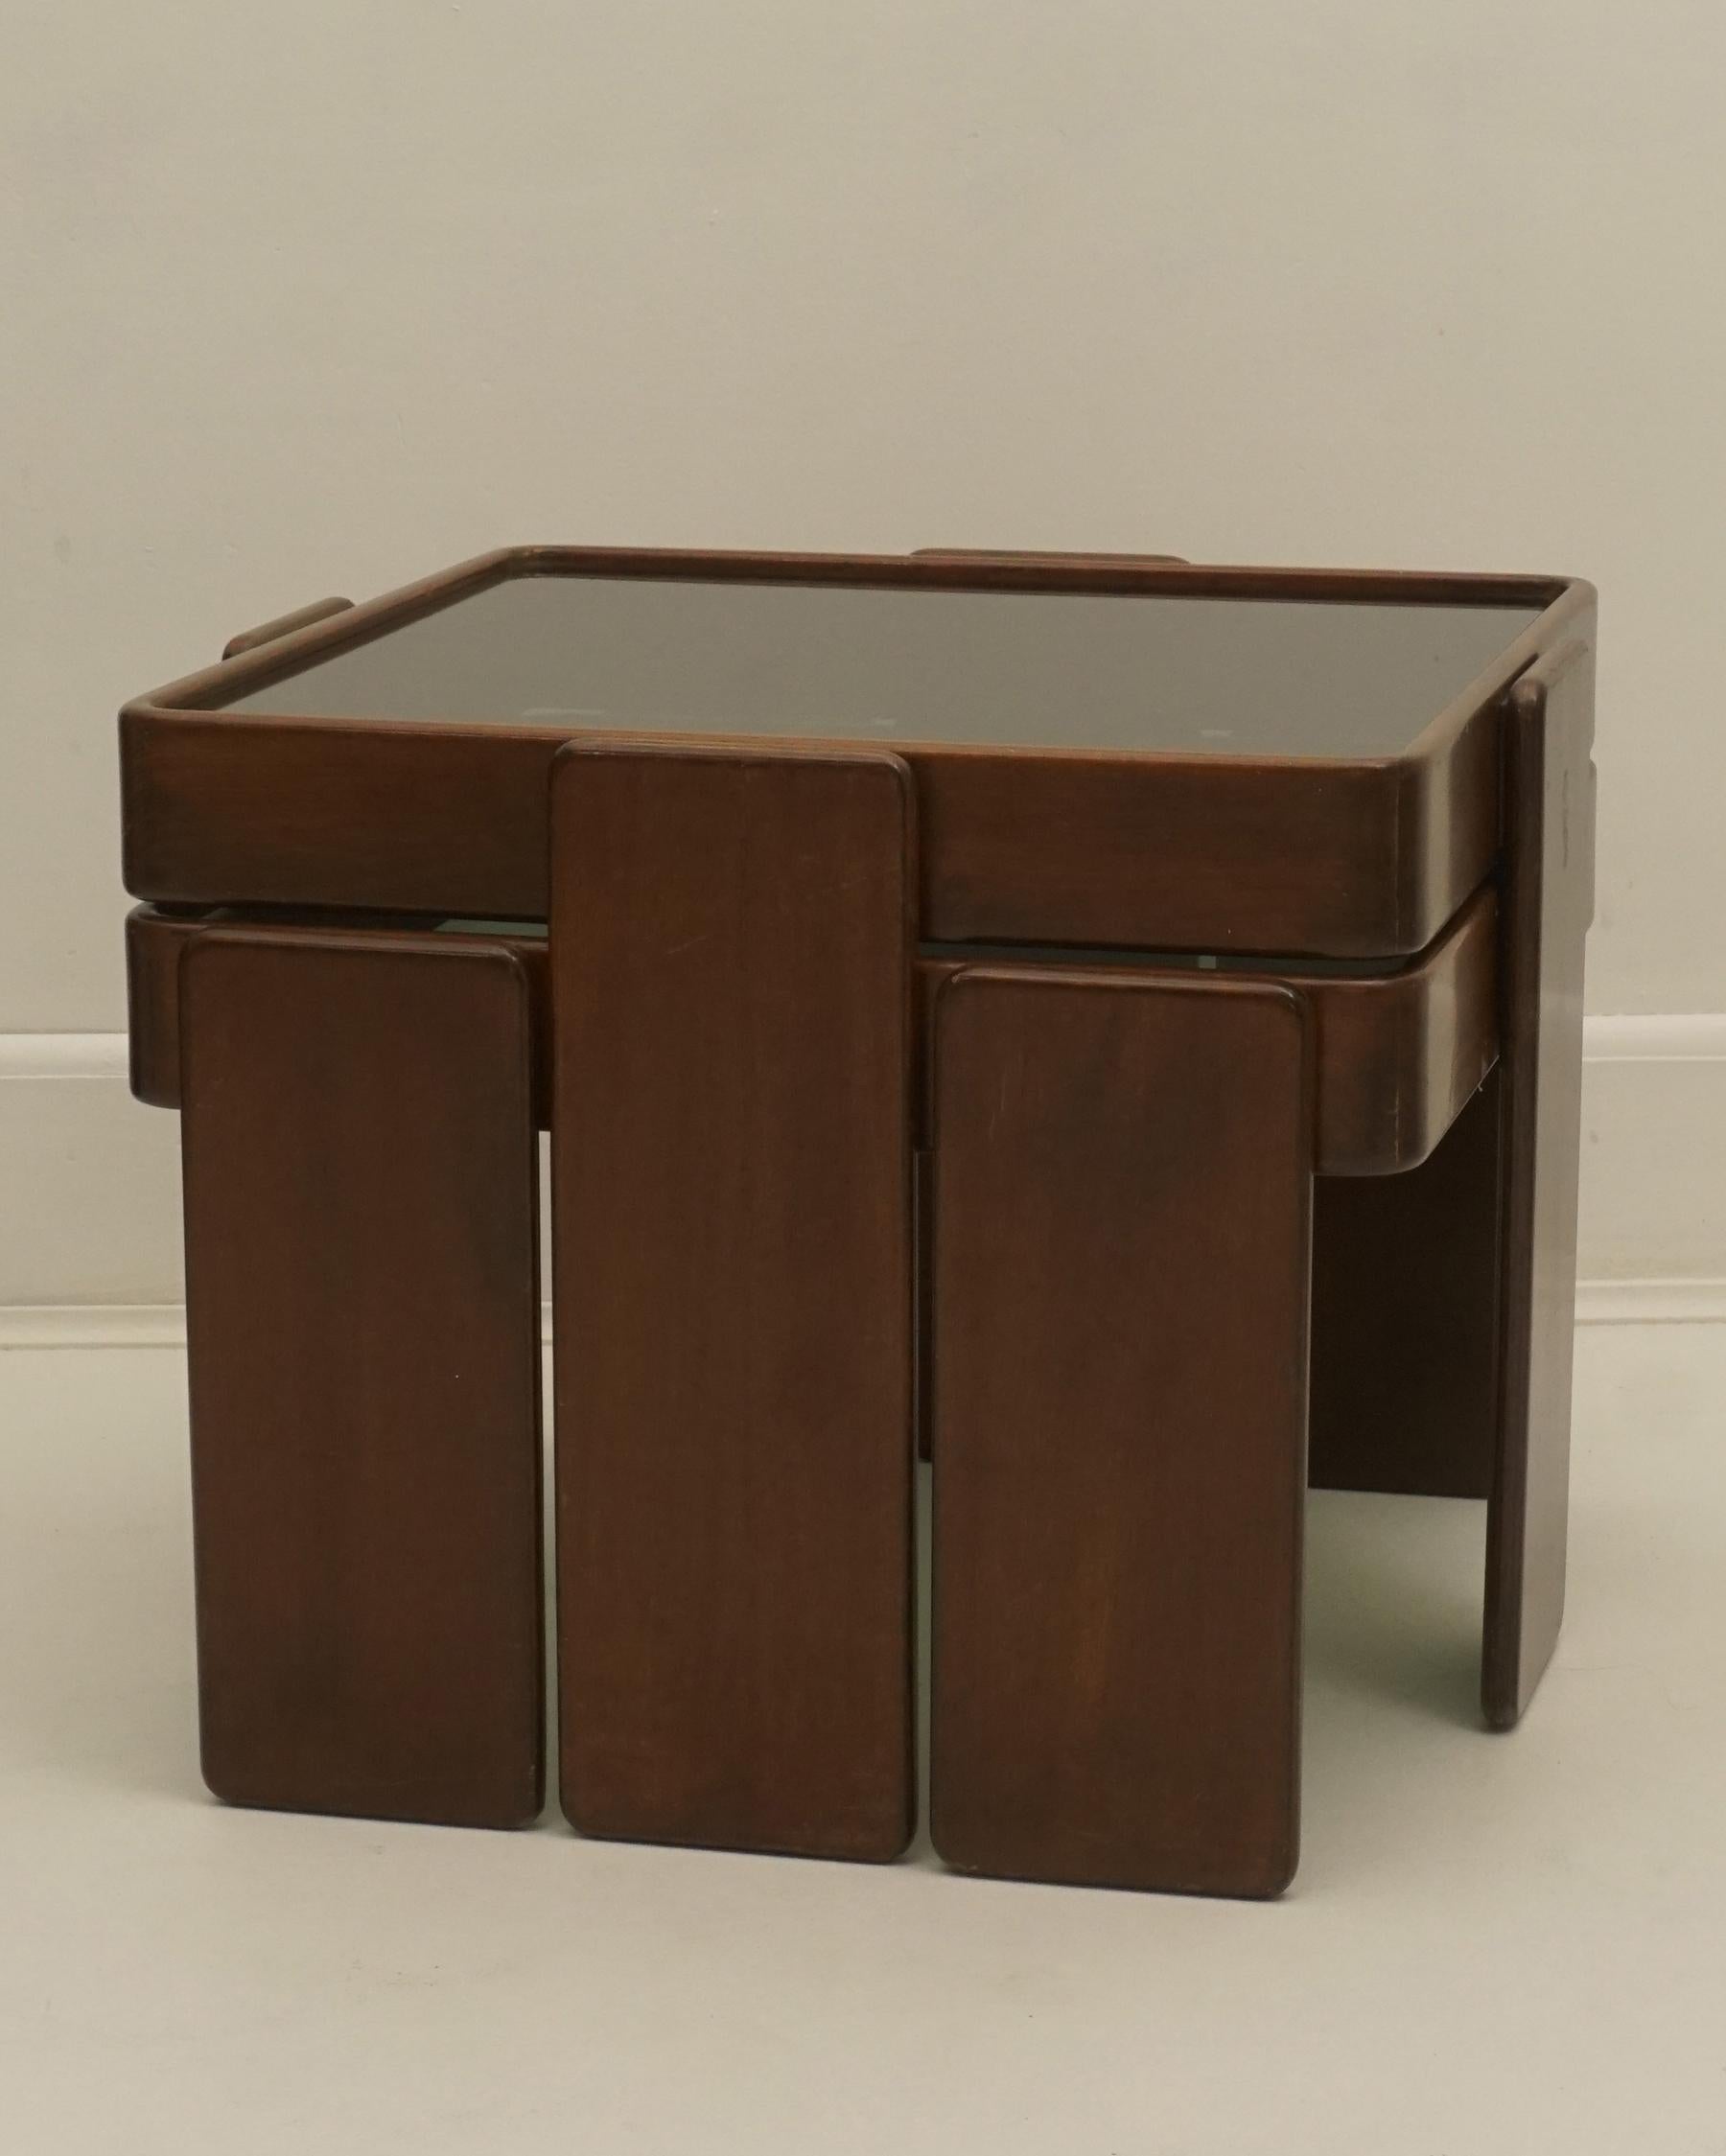 1960s stacking tables by Gianfranco Frattini for Cassina. Made in Italy. The two tables are stackable to create a square block. Wood with smoked glass. In good used vintage condition, some scuffs, small nicks, and signs of age and use. Sold as set